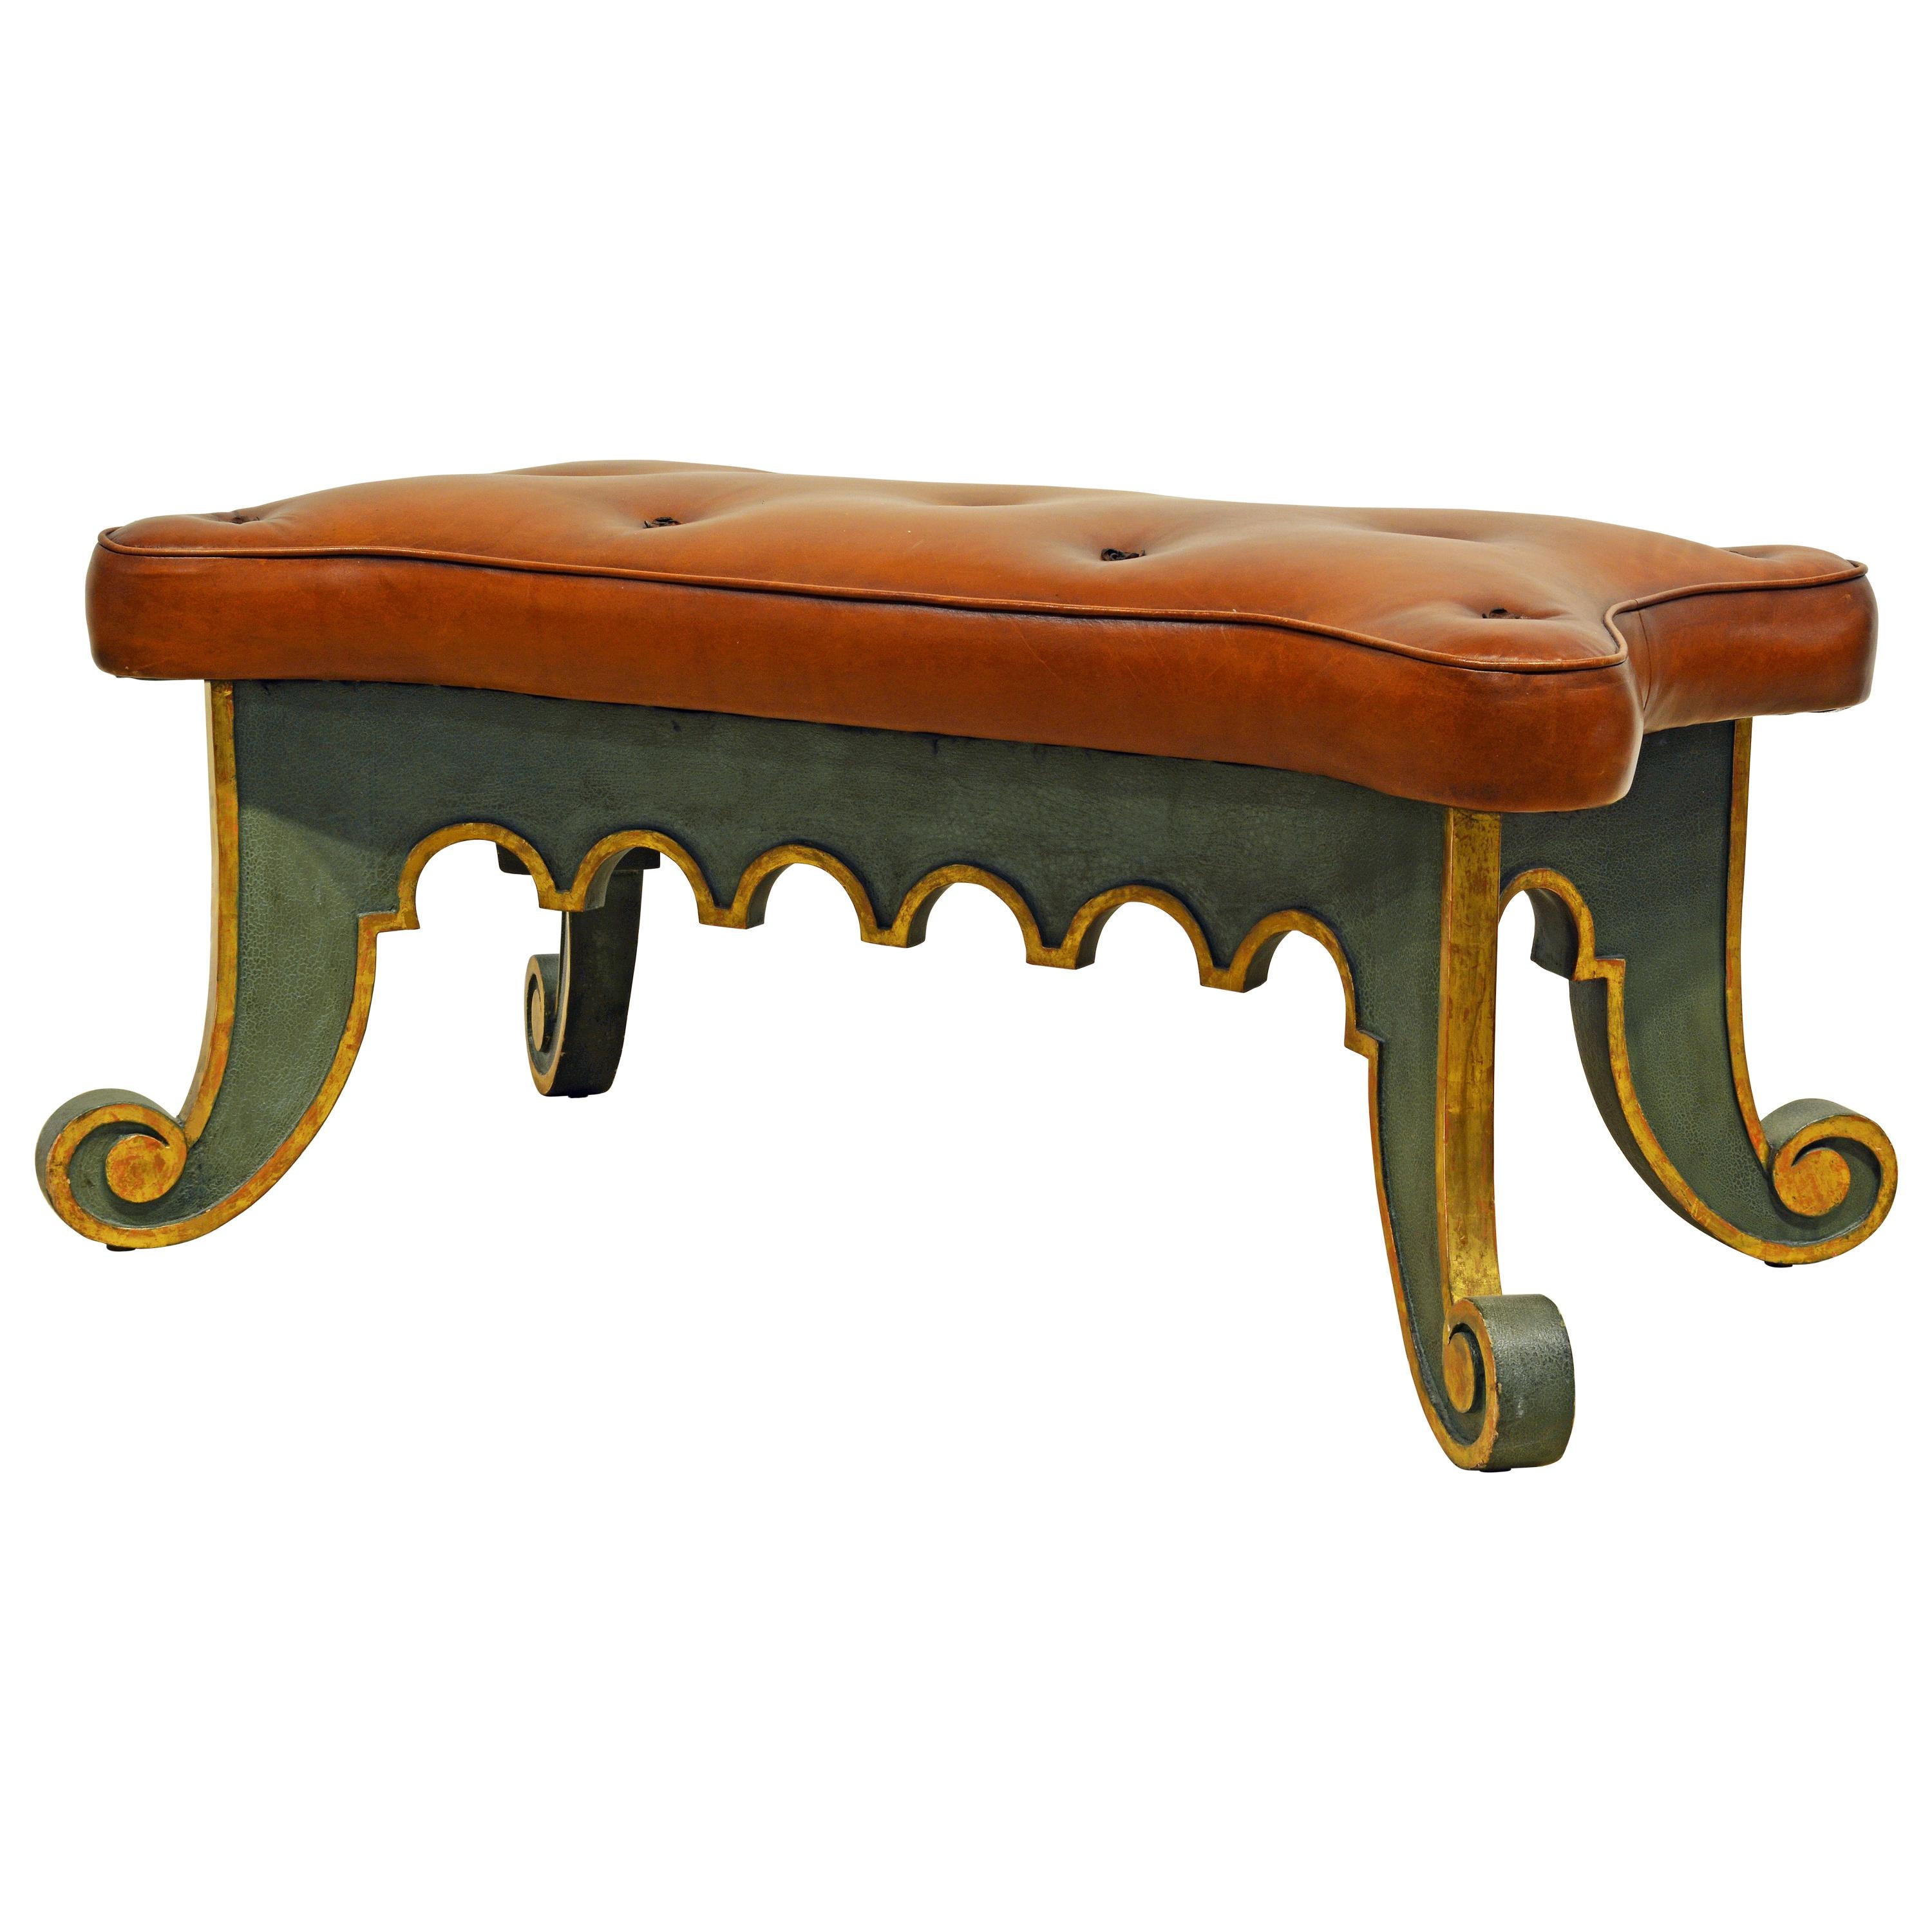 20th Century Venetian Style Painted and Parcel-Gilt Leather Covered Bench